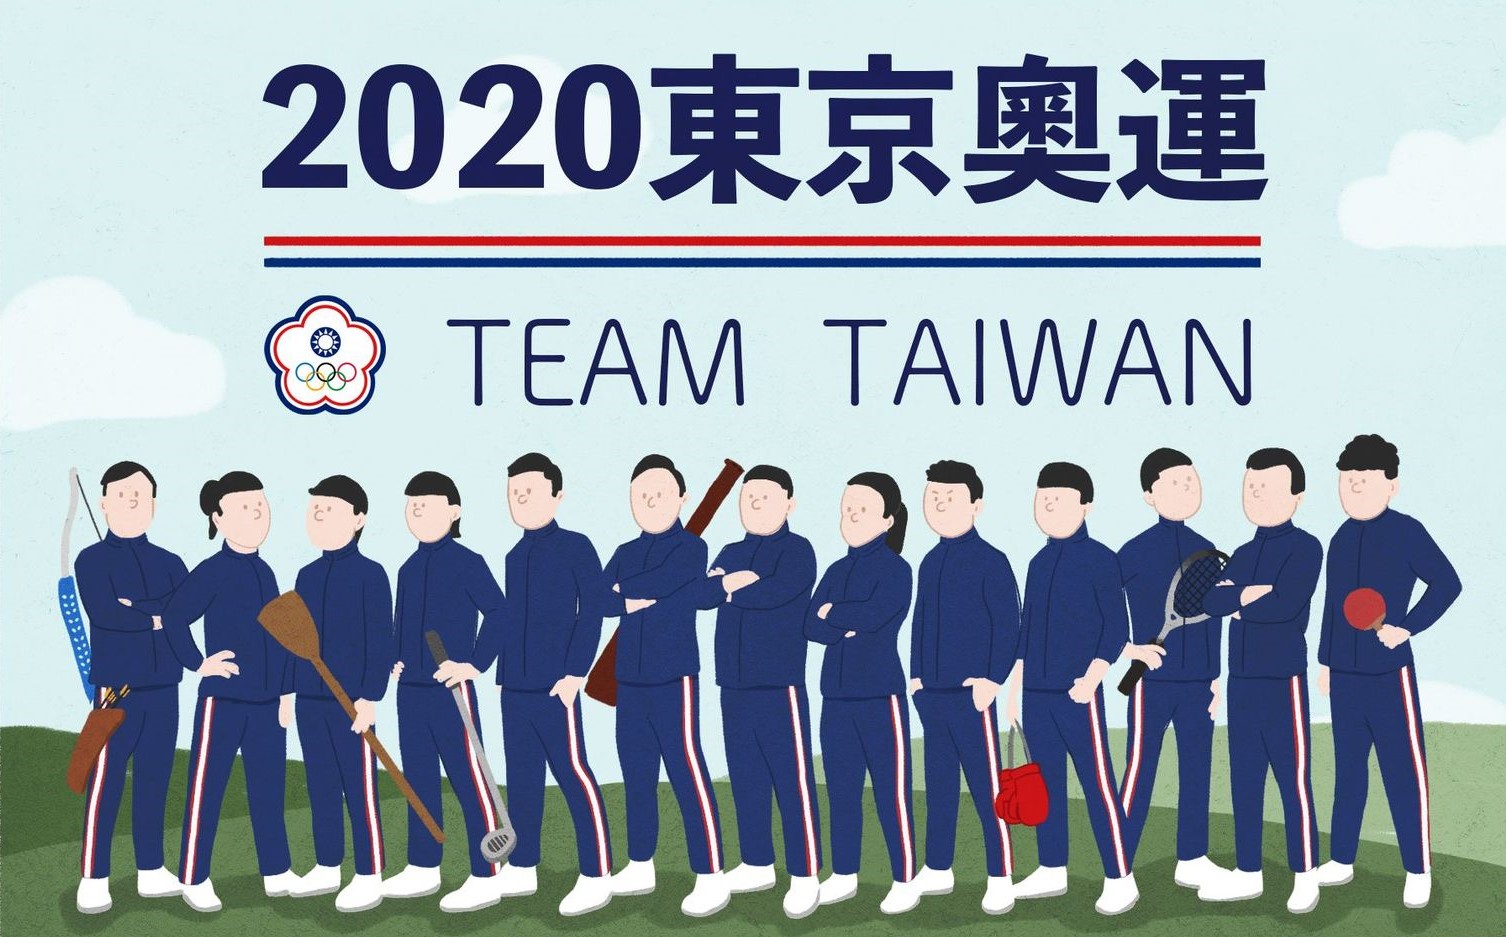 The Tokyo Olympics competitions schedule of the Chinese Taipei team is over, setting a record of success. Photo/Retrieved from Home Run Taiwan